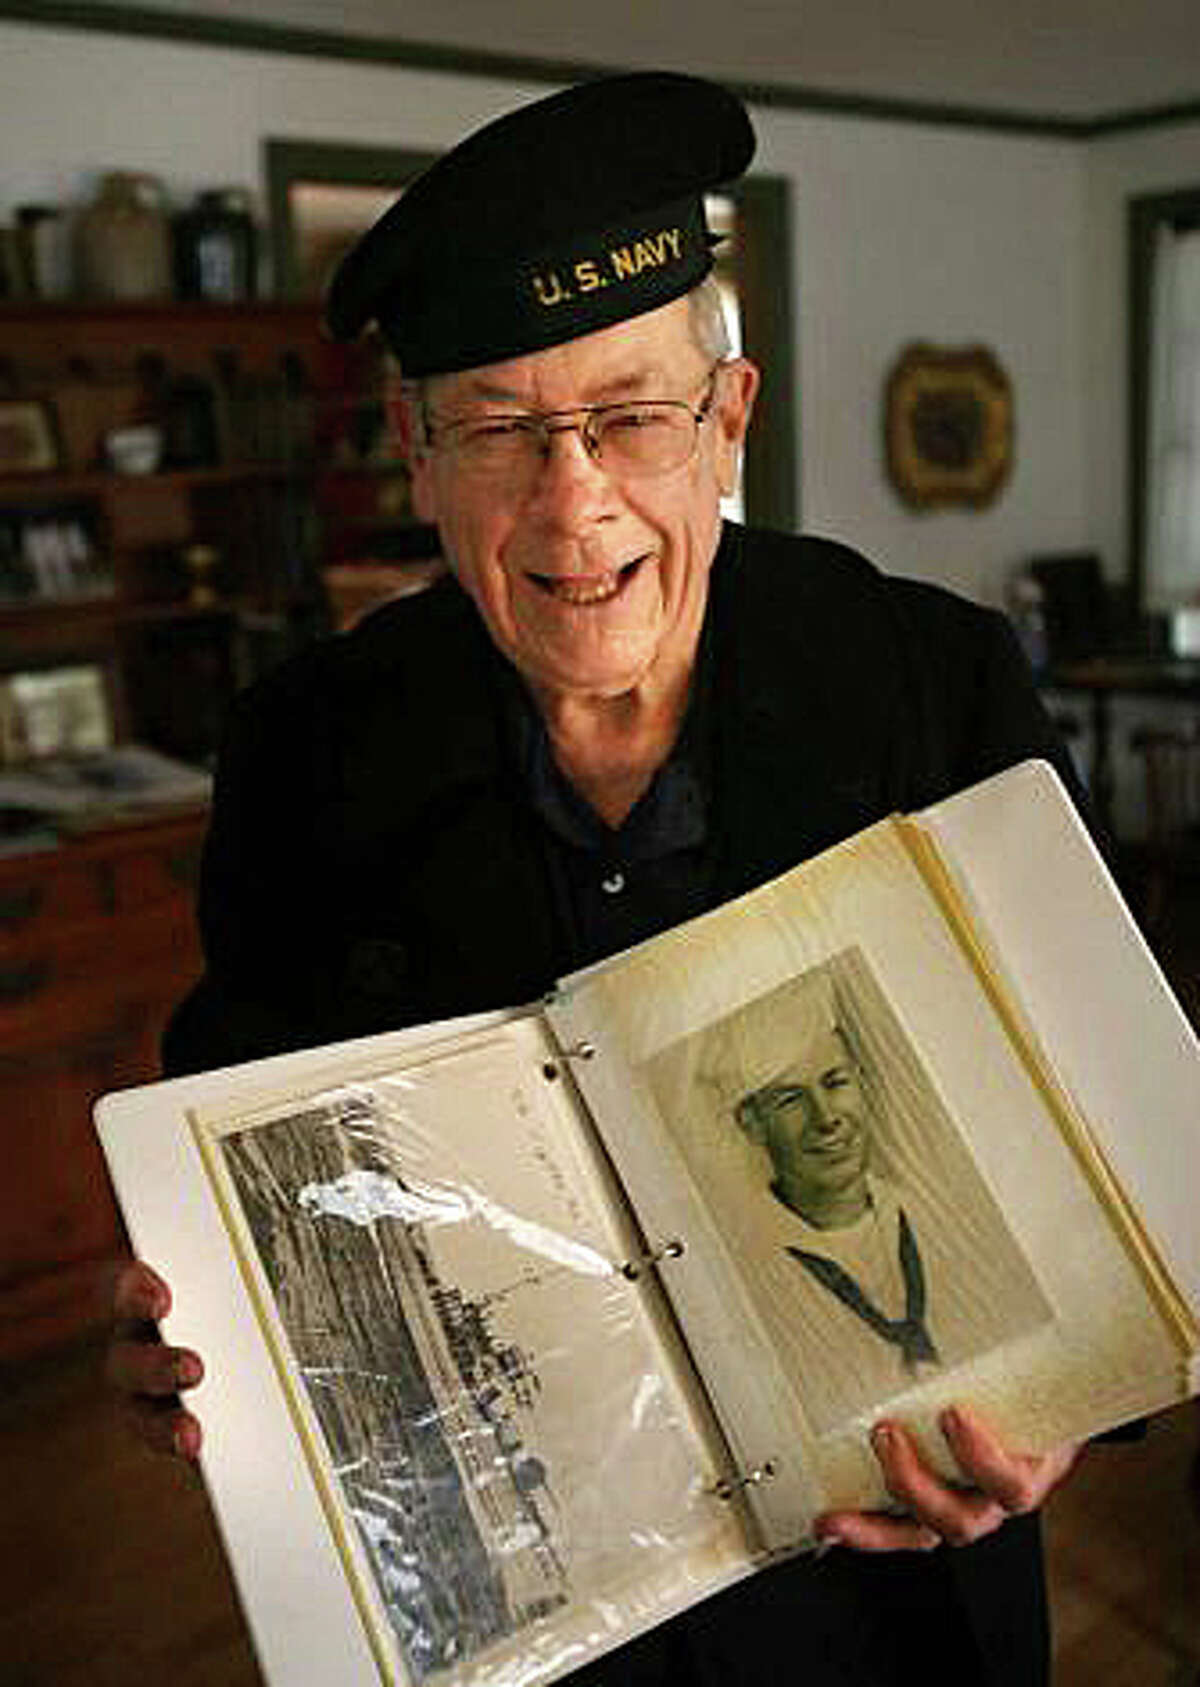 World War II veteran and former Fire Chief Dave Russell holds a picture of his ship, the PCS 1392 patrol craft, which served as a deterrent to attacks by German U-Boats in the Atlantic. Russell joined the Navy at the age of 17 and served from 1944 through 1946. FAIRFIELD CITIZEN, CT 8/31/13